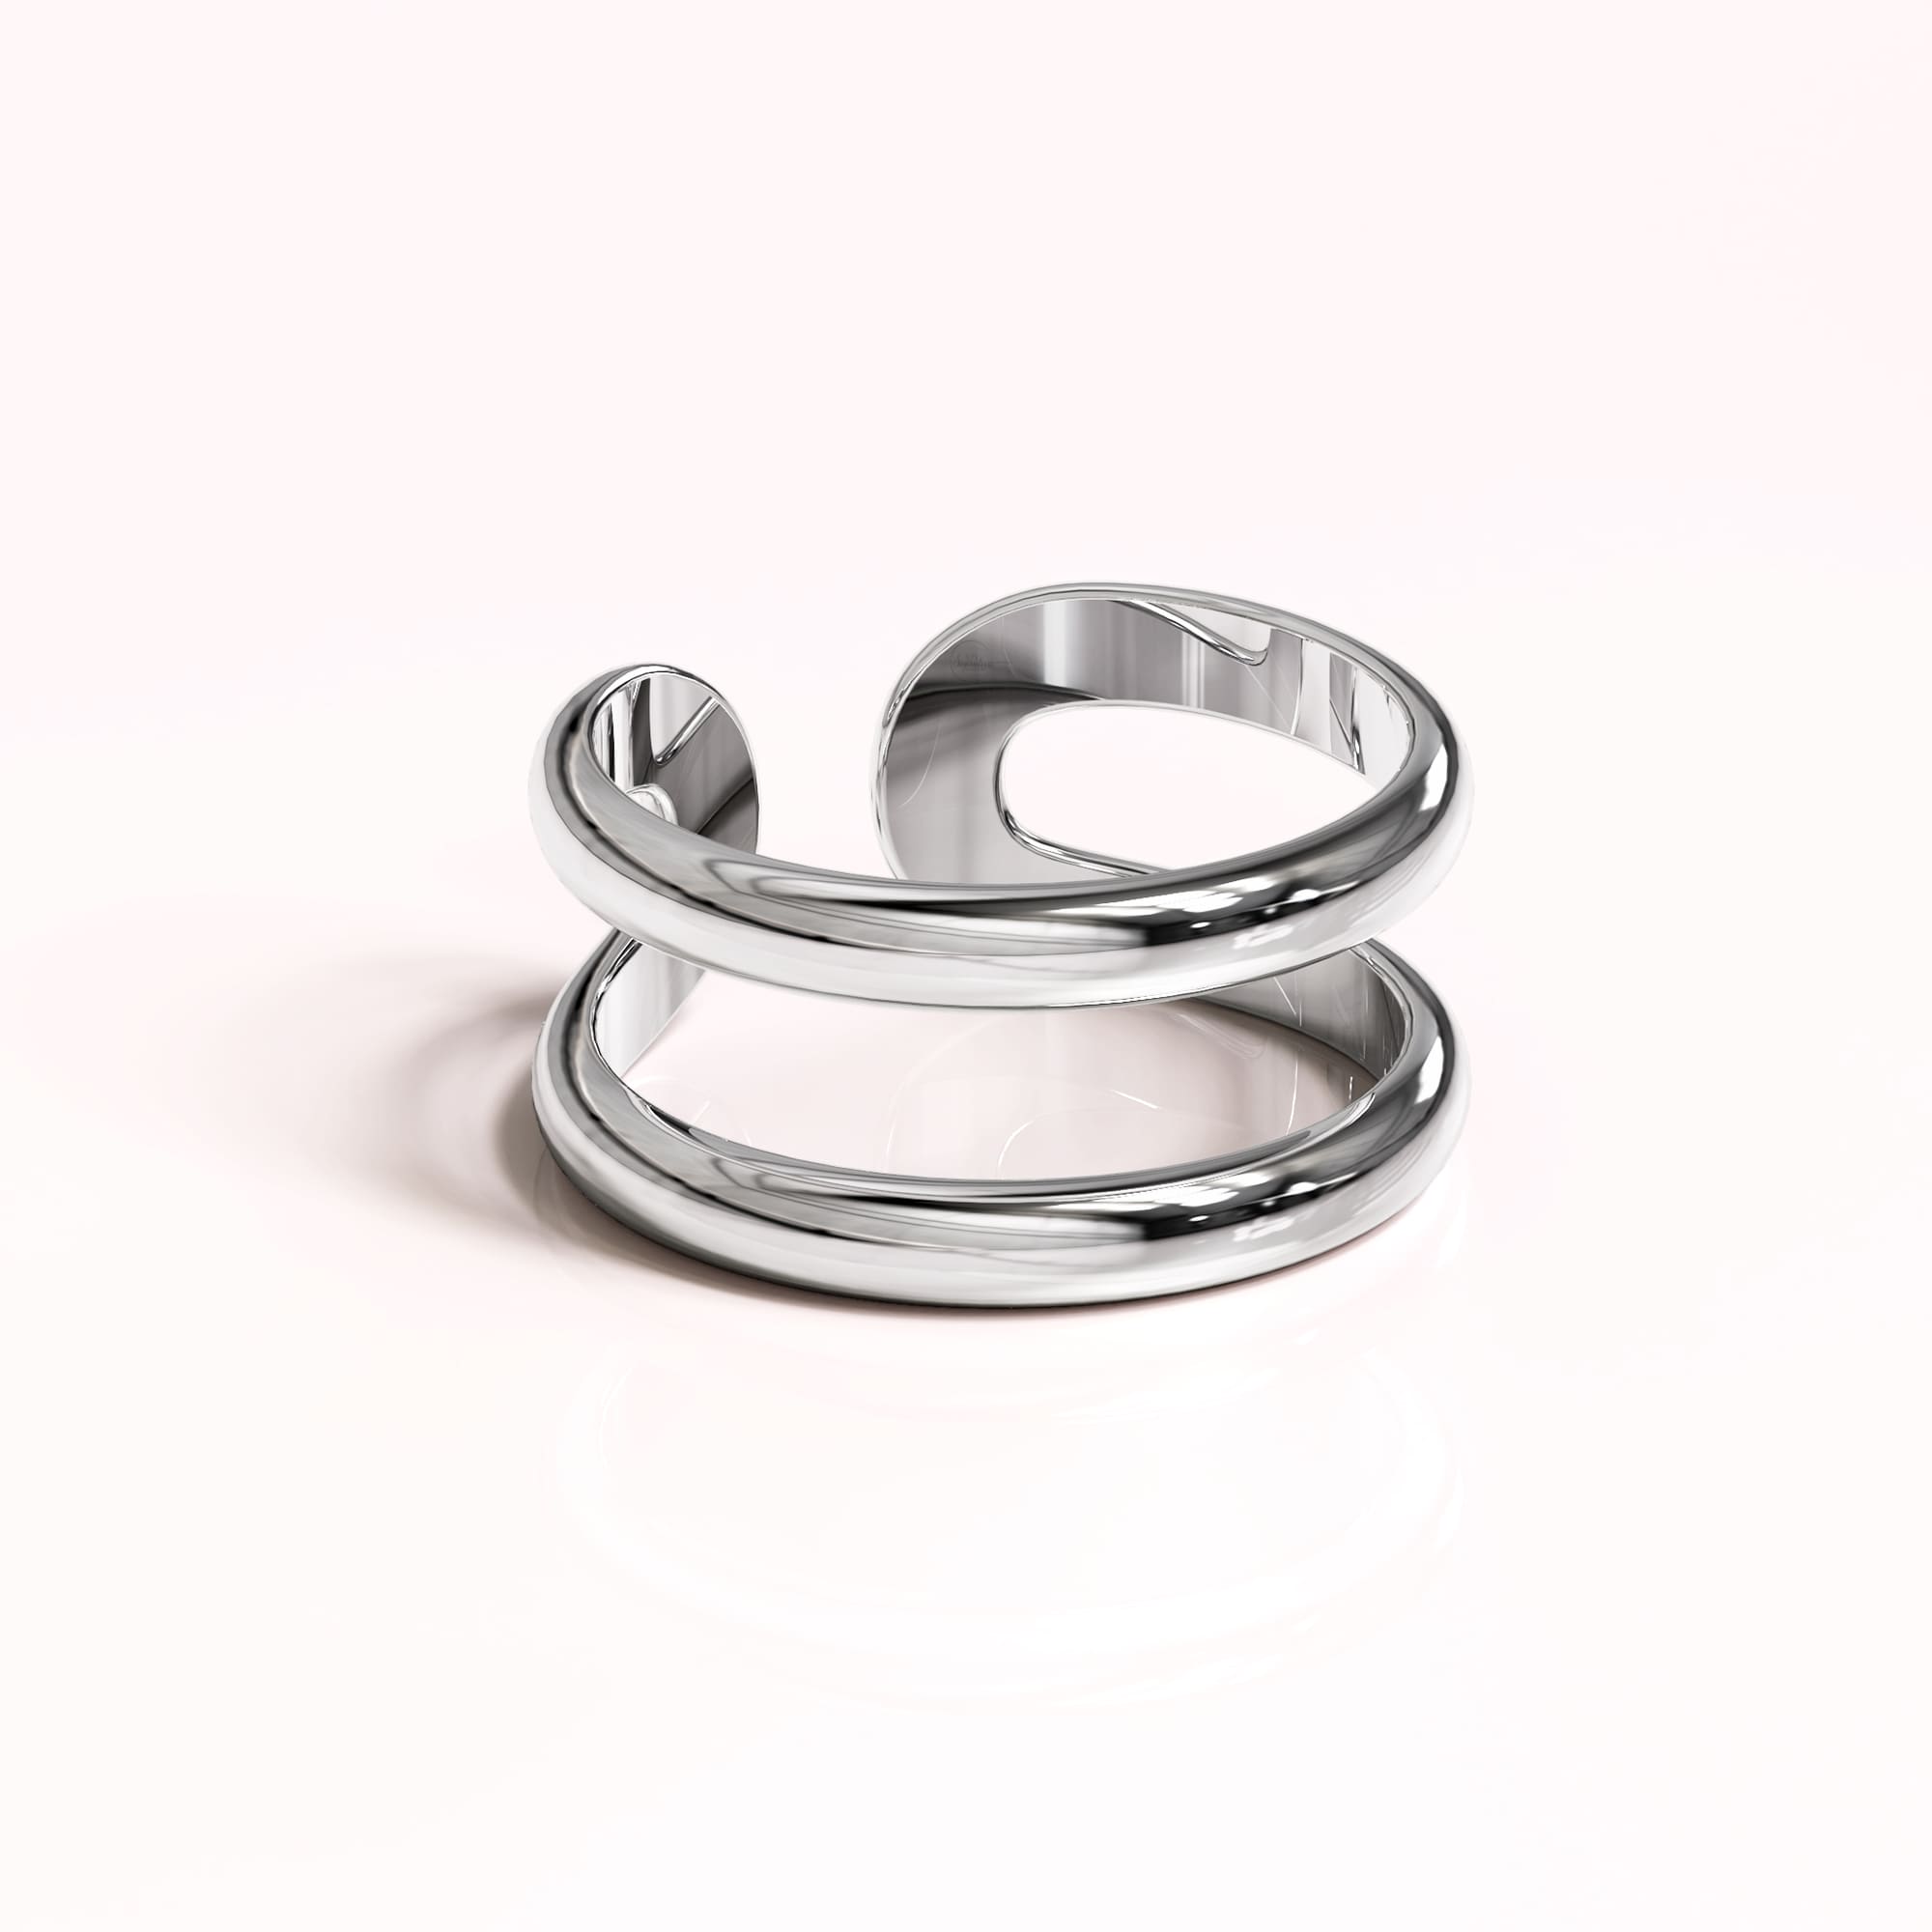 Solid 925 Sterling Silver Duo Band Adjustable Ring